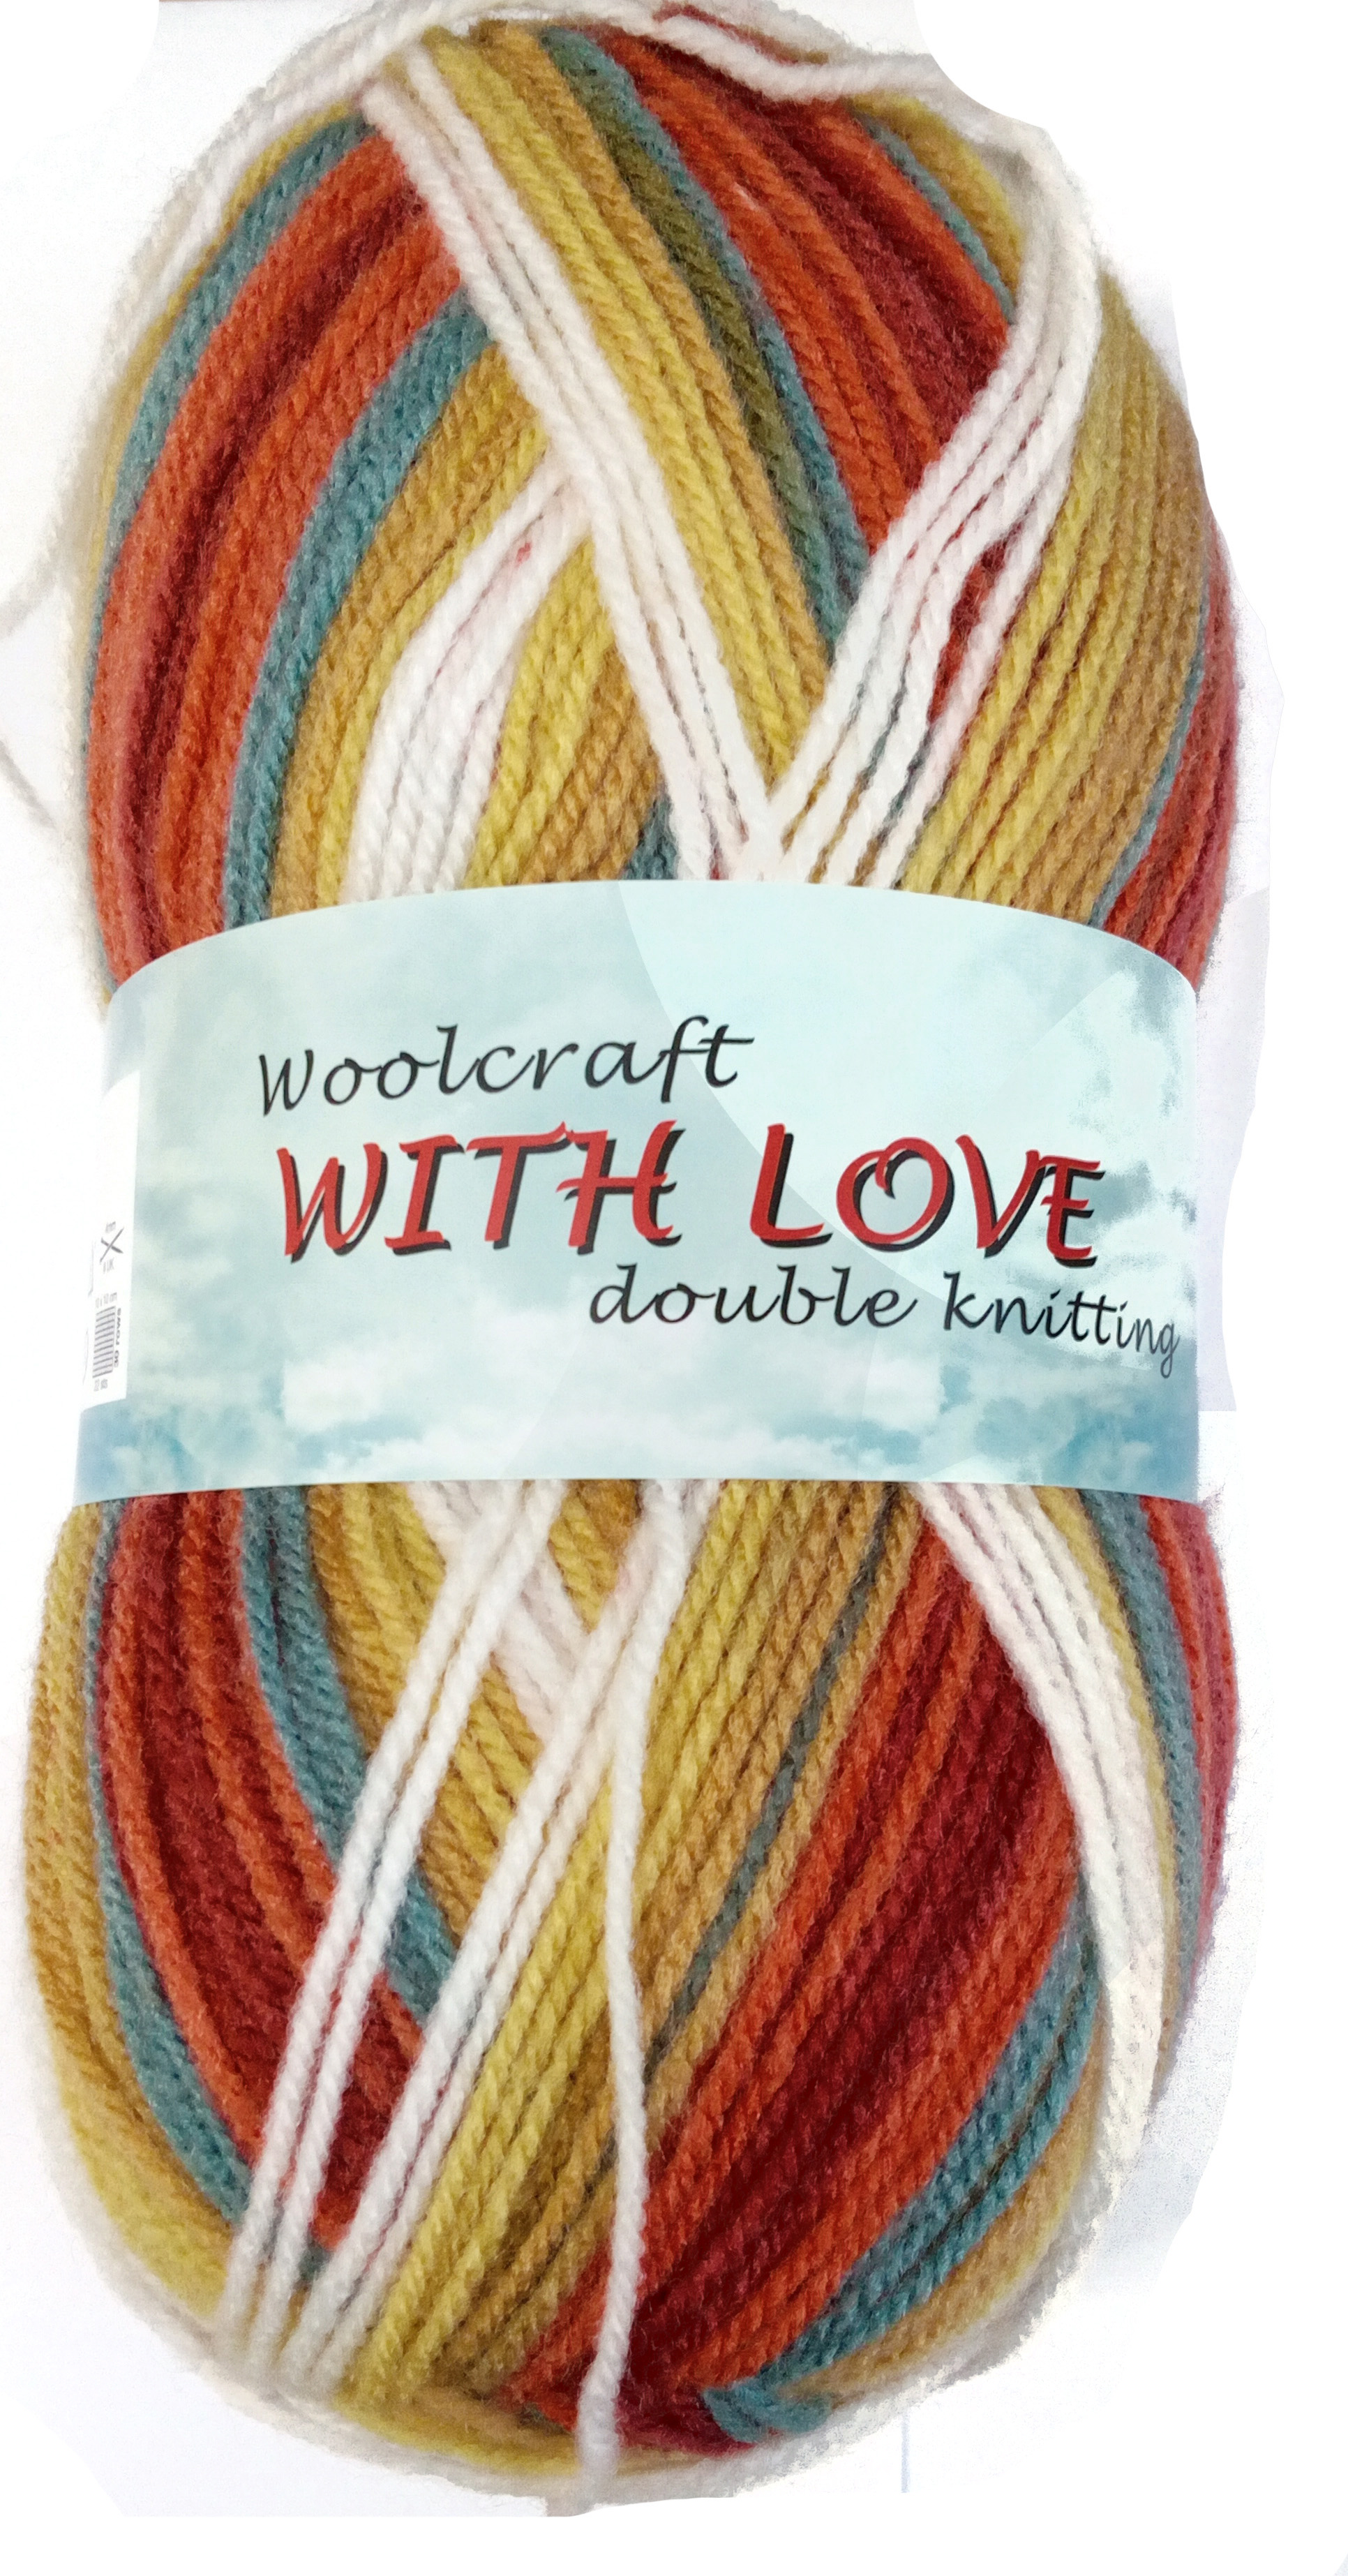 With Love DK Yarn- Small Copper